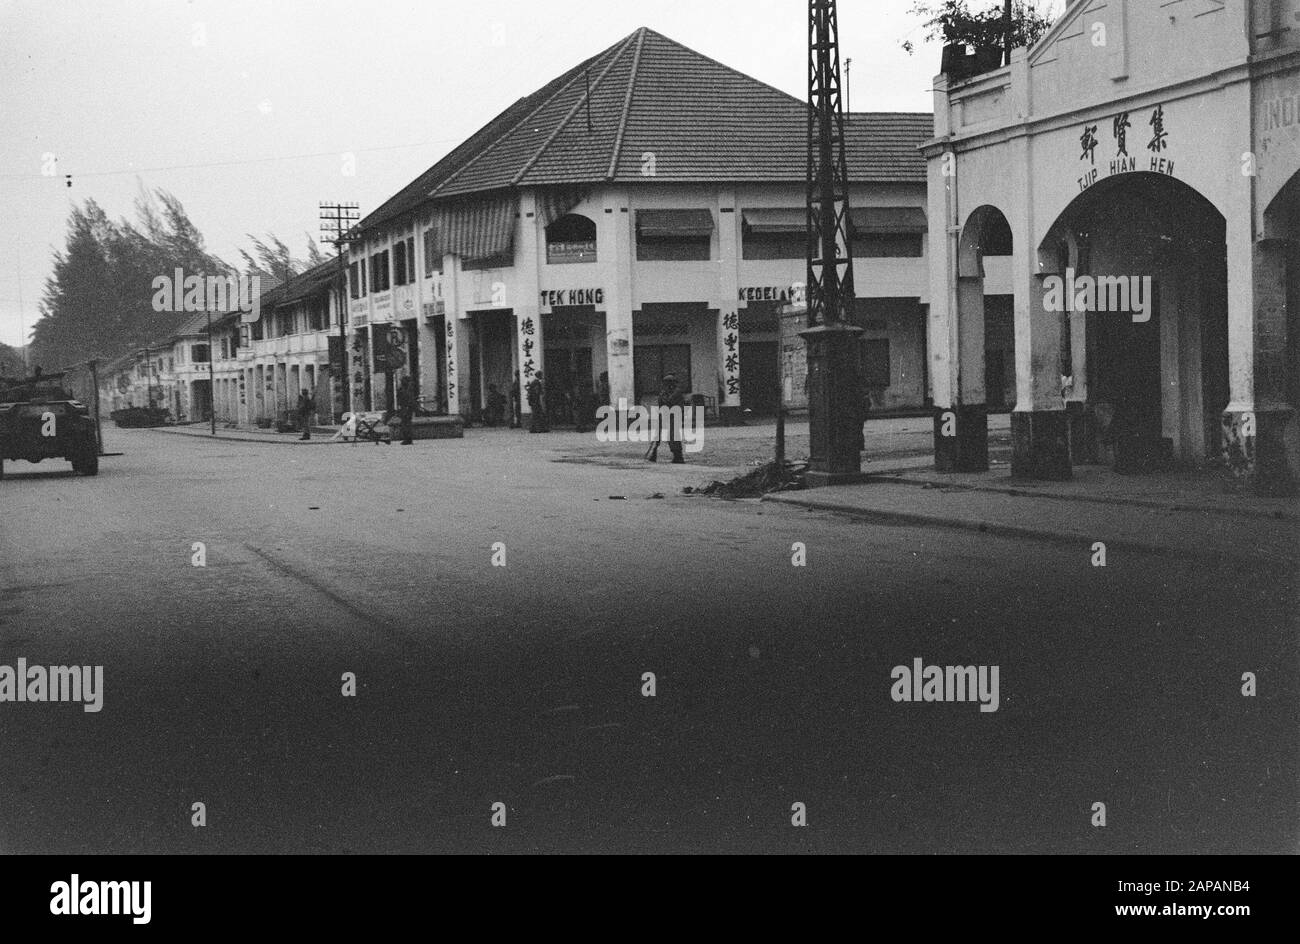 Loeboek Pakem en Baoengan Description: Occupation of Siantar. Dutch militarians on the streets. Buildings with Chinese entries Date: 29 July 1948 Location: Indonesia, Dutch East Indies, Sumatra Stock Photo